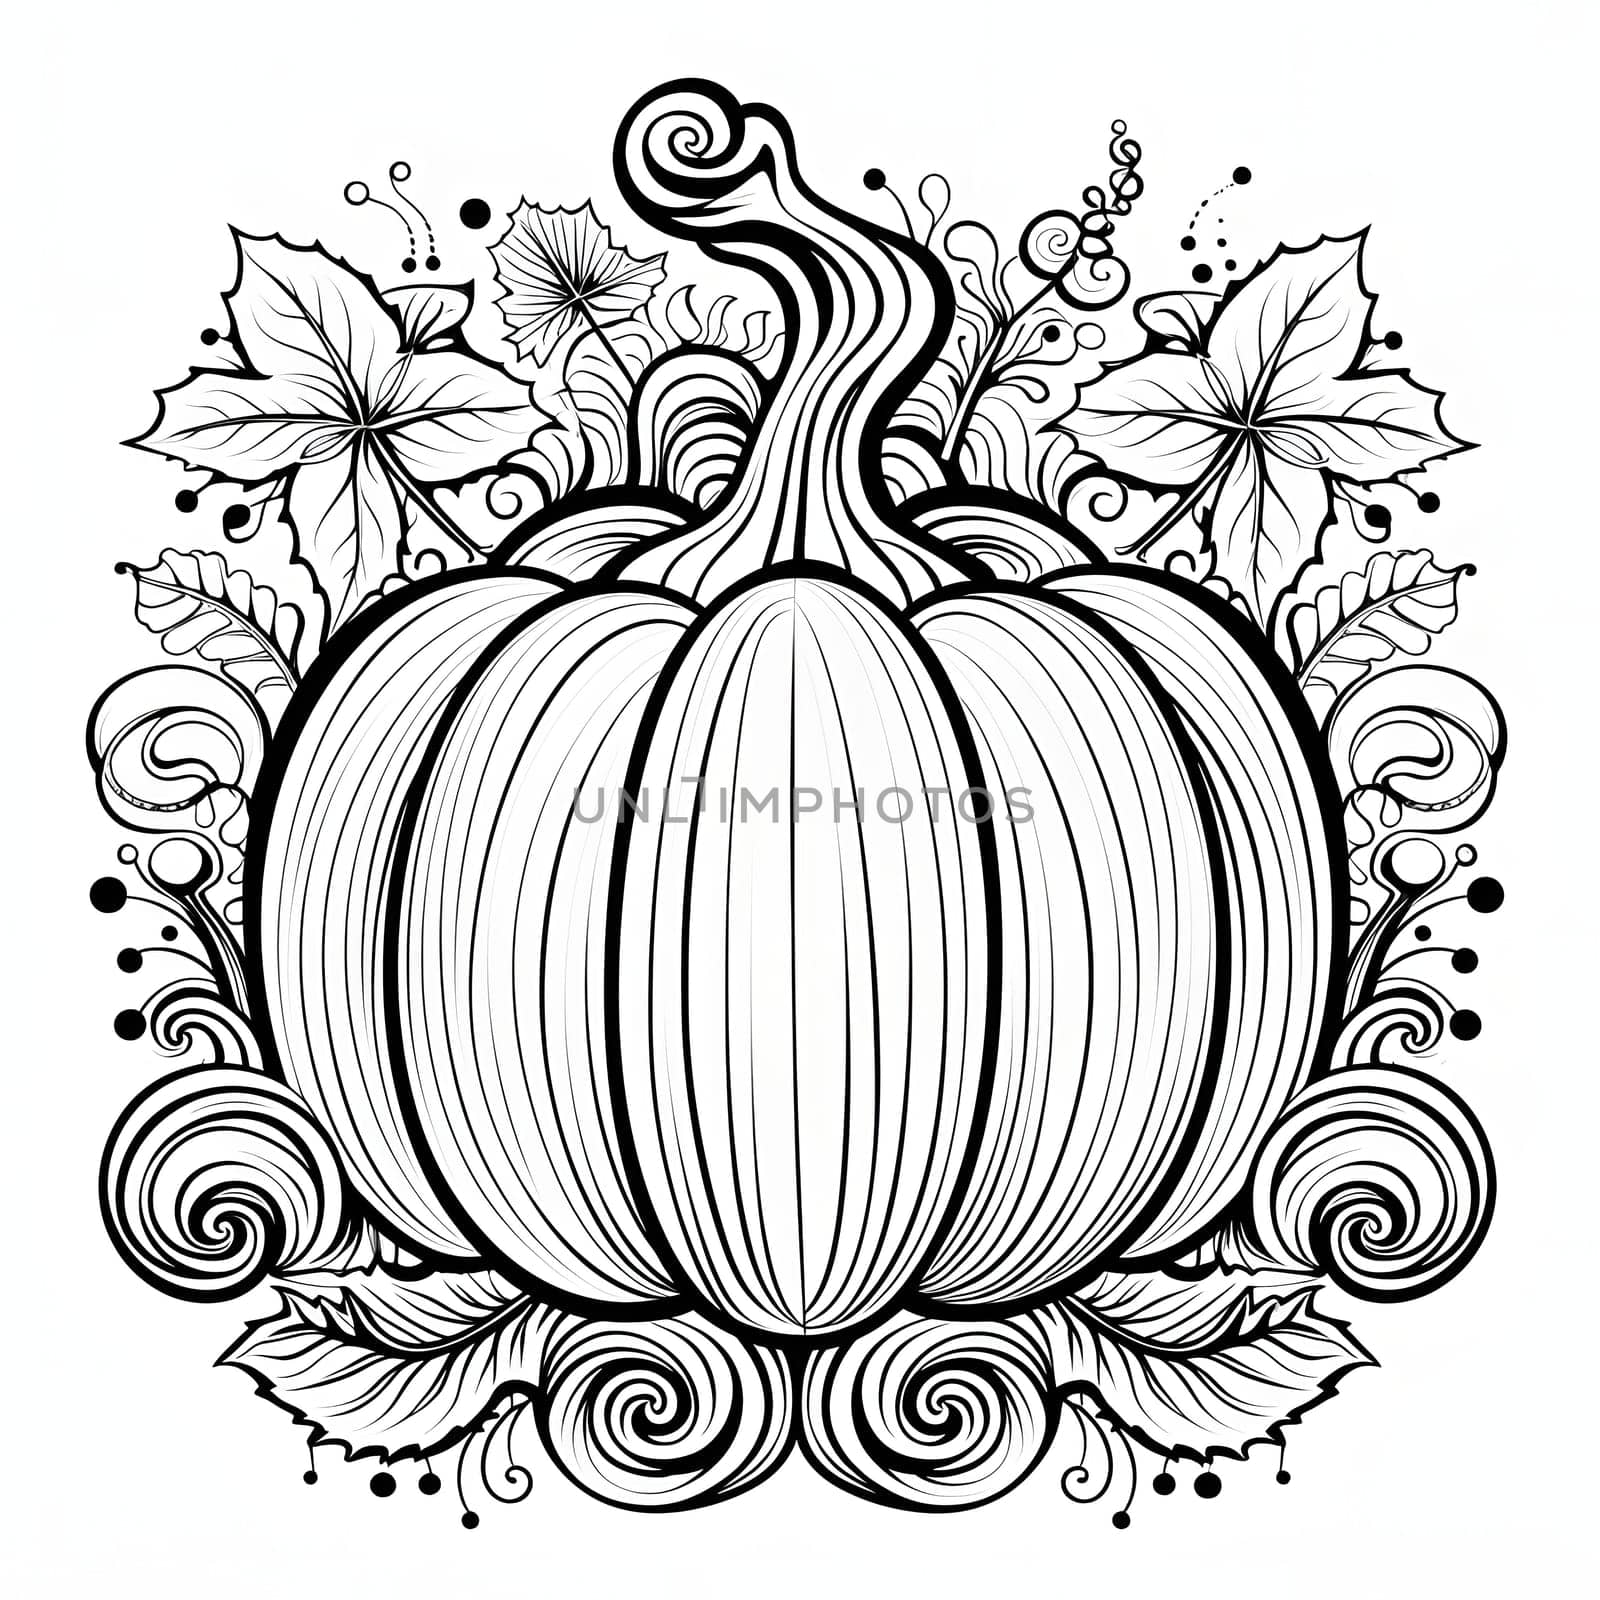 Black and white pumpkin with flowers and decorations around, coloring book. Pumpkin as a dish of thanksgiving for the harvest, picture on a white isolated background. by ThemesS